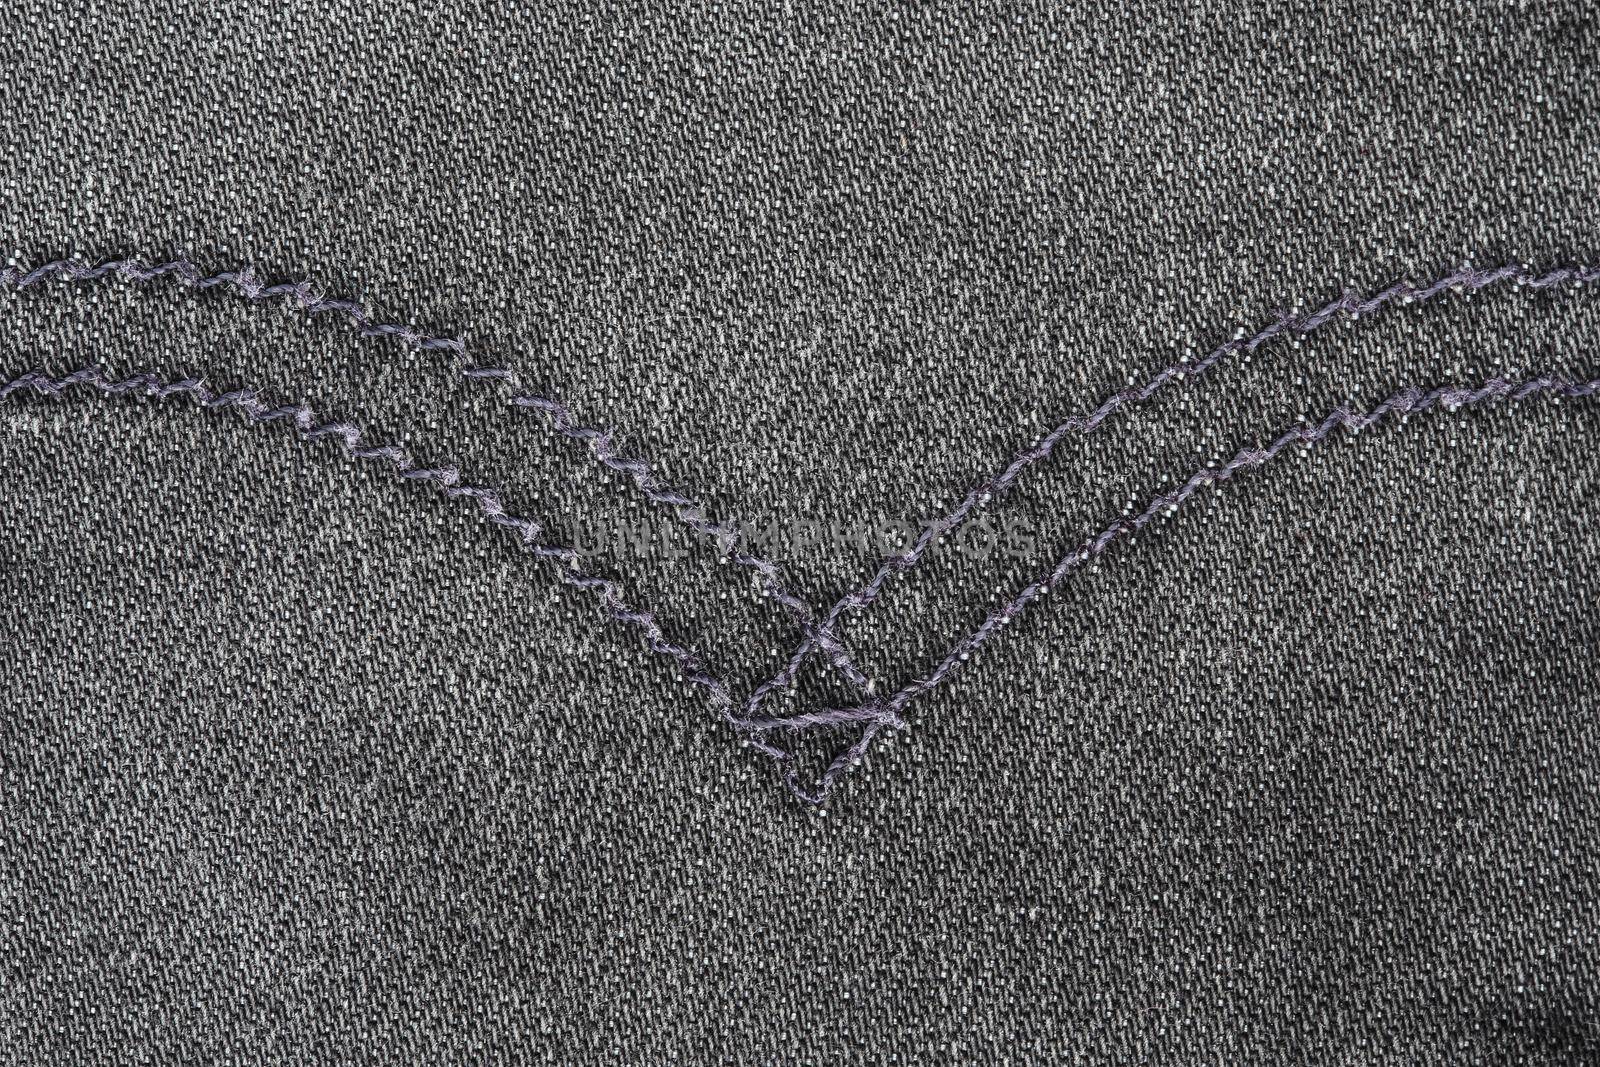 Close up of black jeans texture with stitches